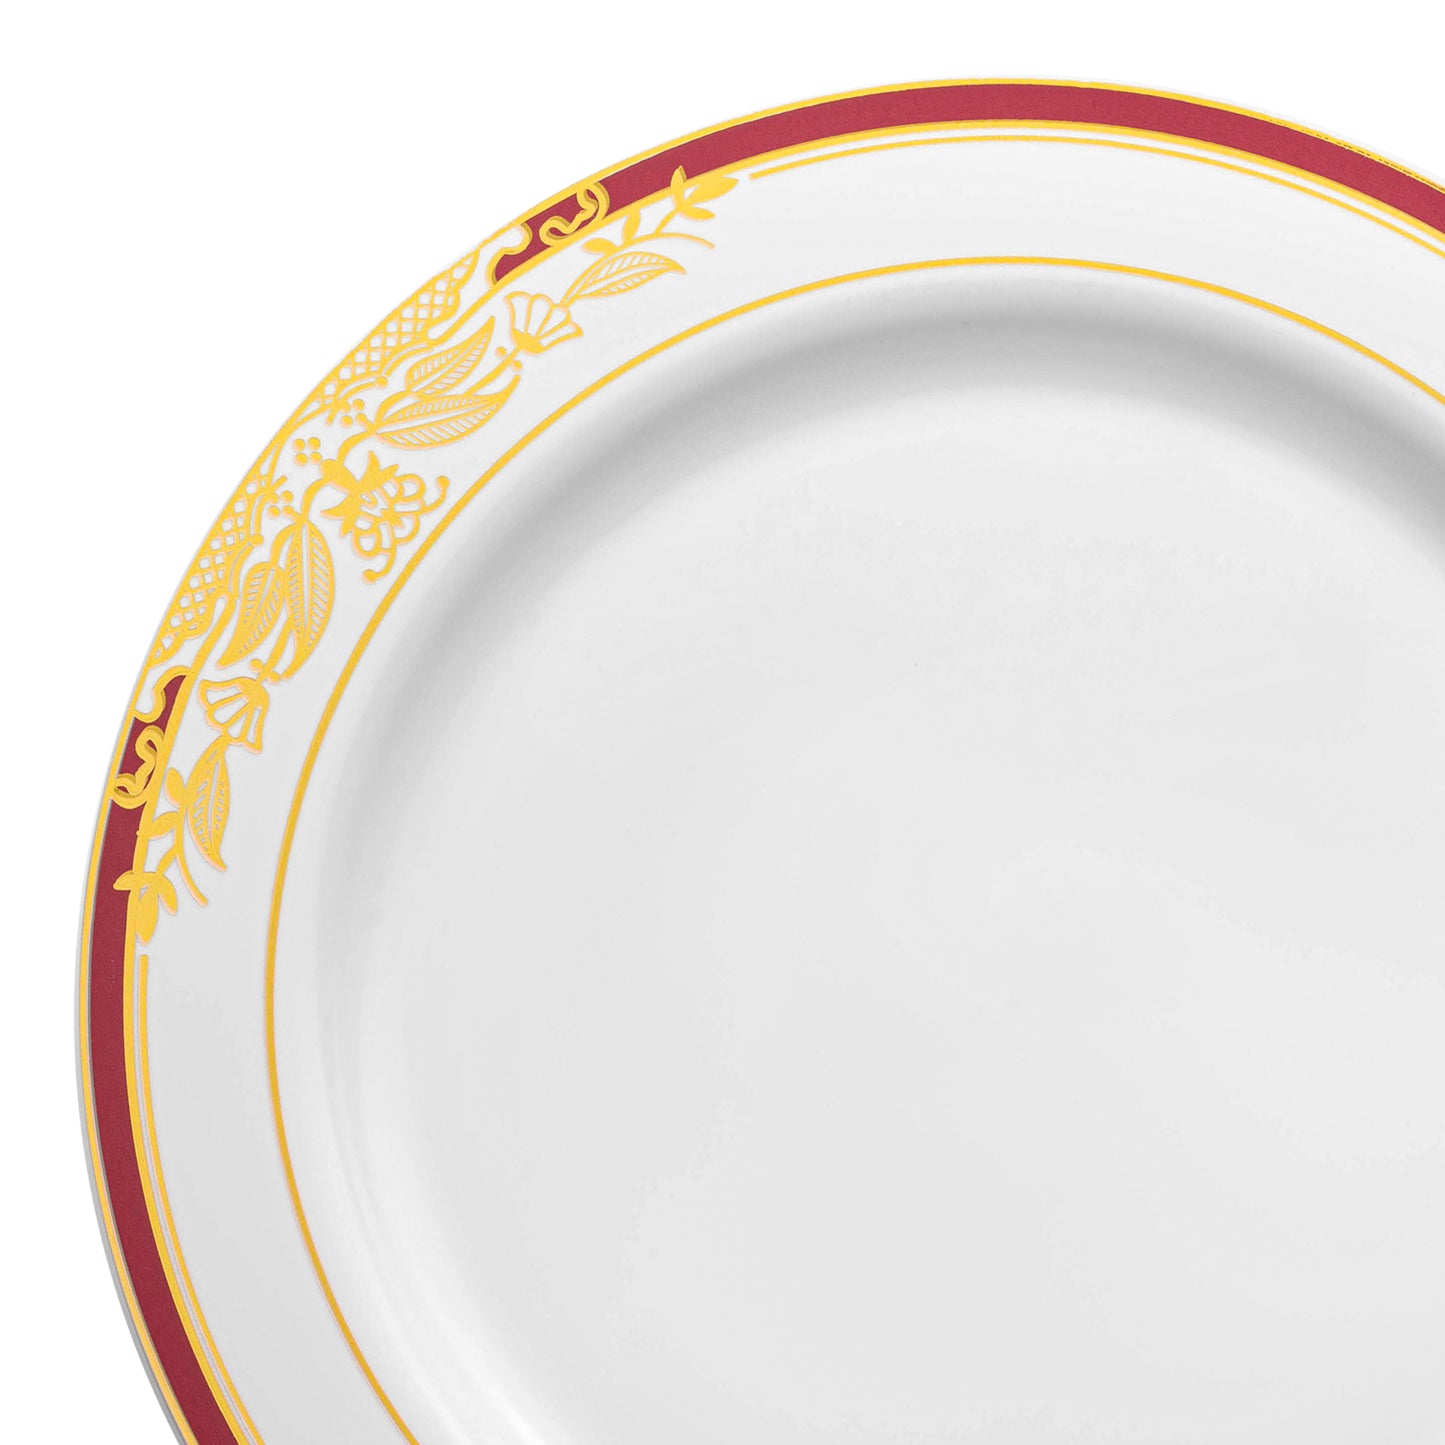 White with Burgundy and Gold Harmony Rim Plastic Dinner Plates (10.25") | The Kaya Collection